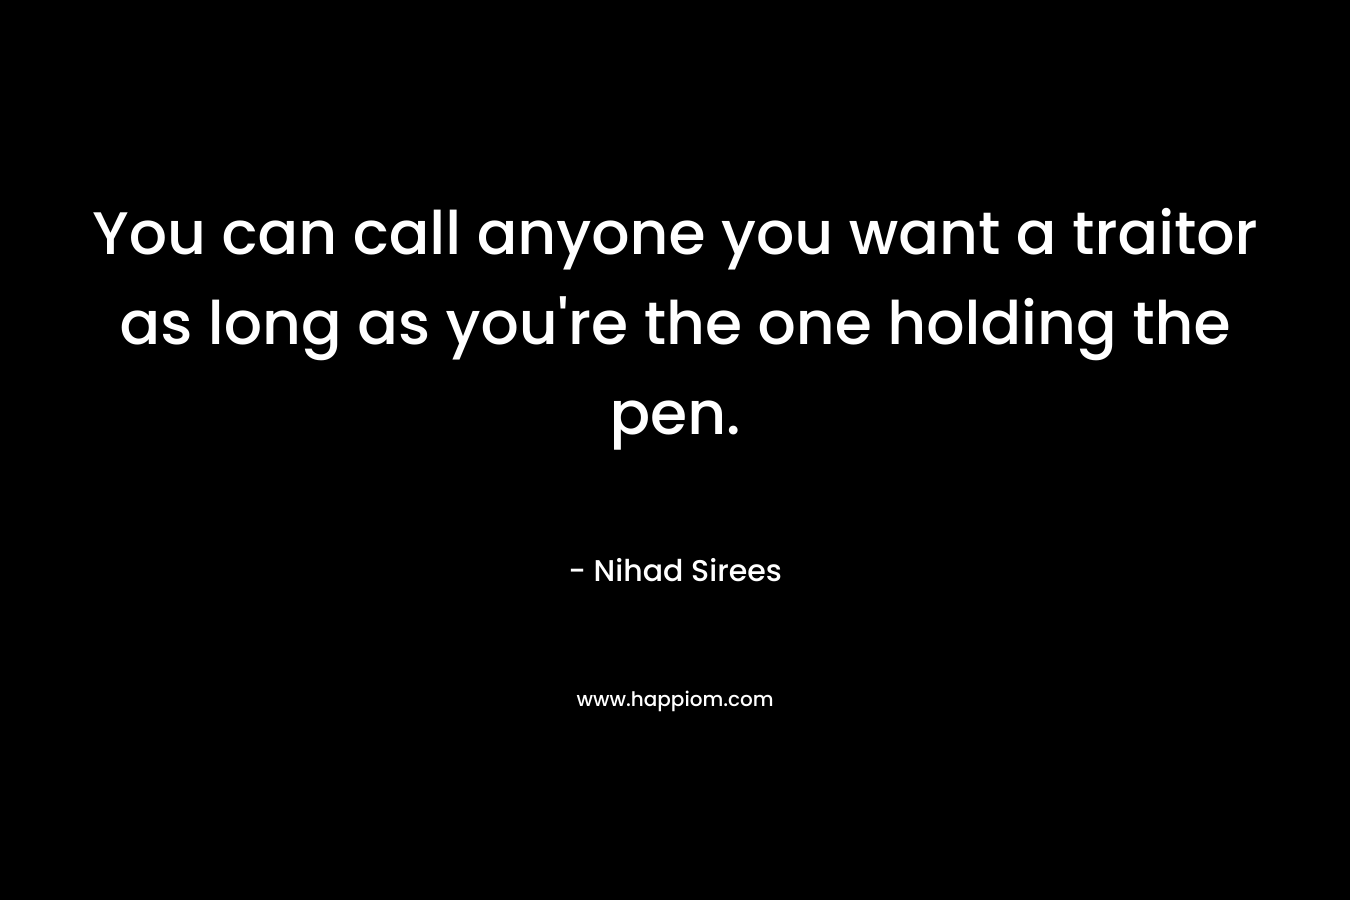 You can call anyone you want a traitor as long as you’re the one holding the pen. – Nihad Sirees